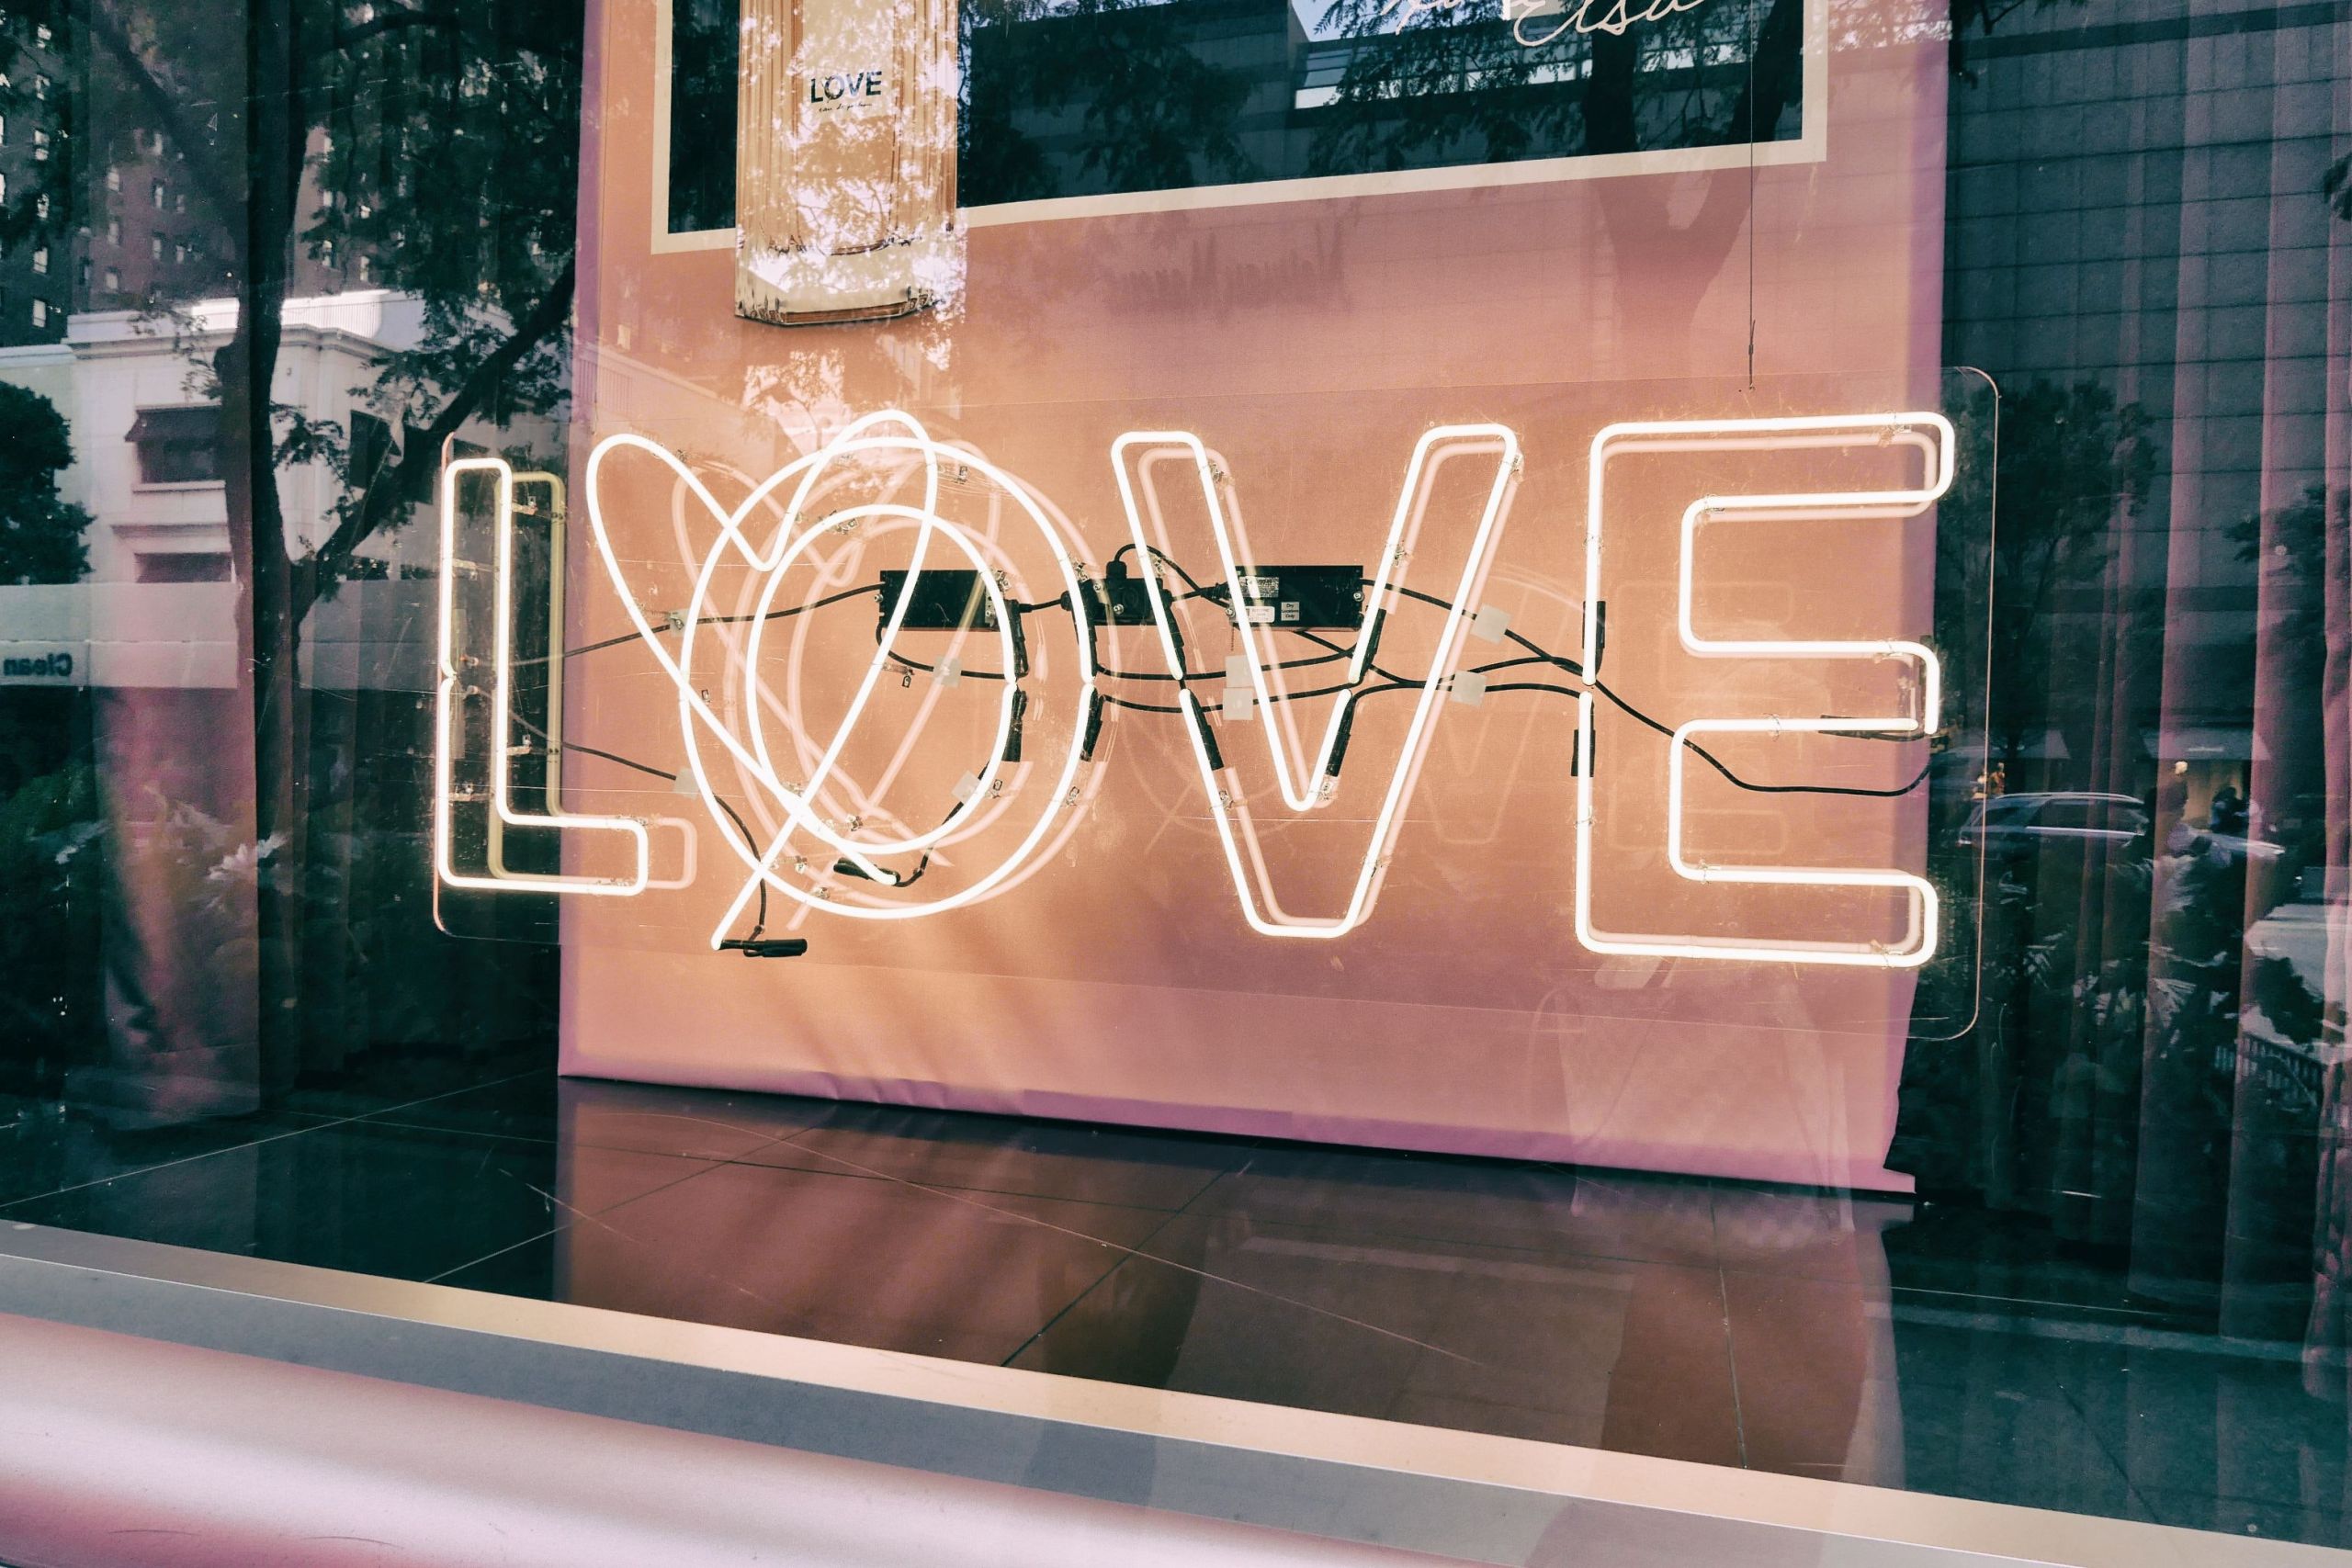 Valentine's Day is a day of love. Photo by Loe Moshkovska from Pexels.